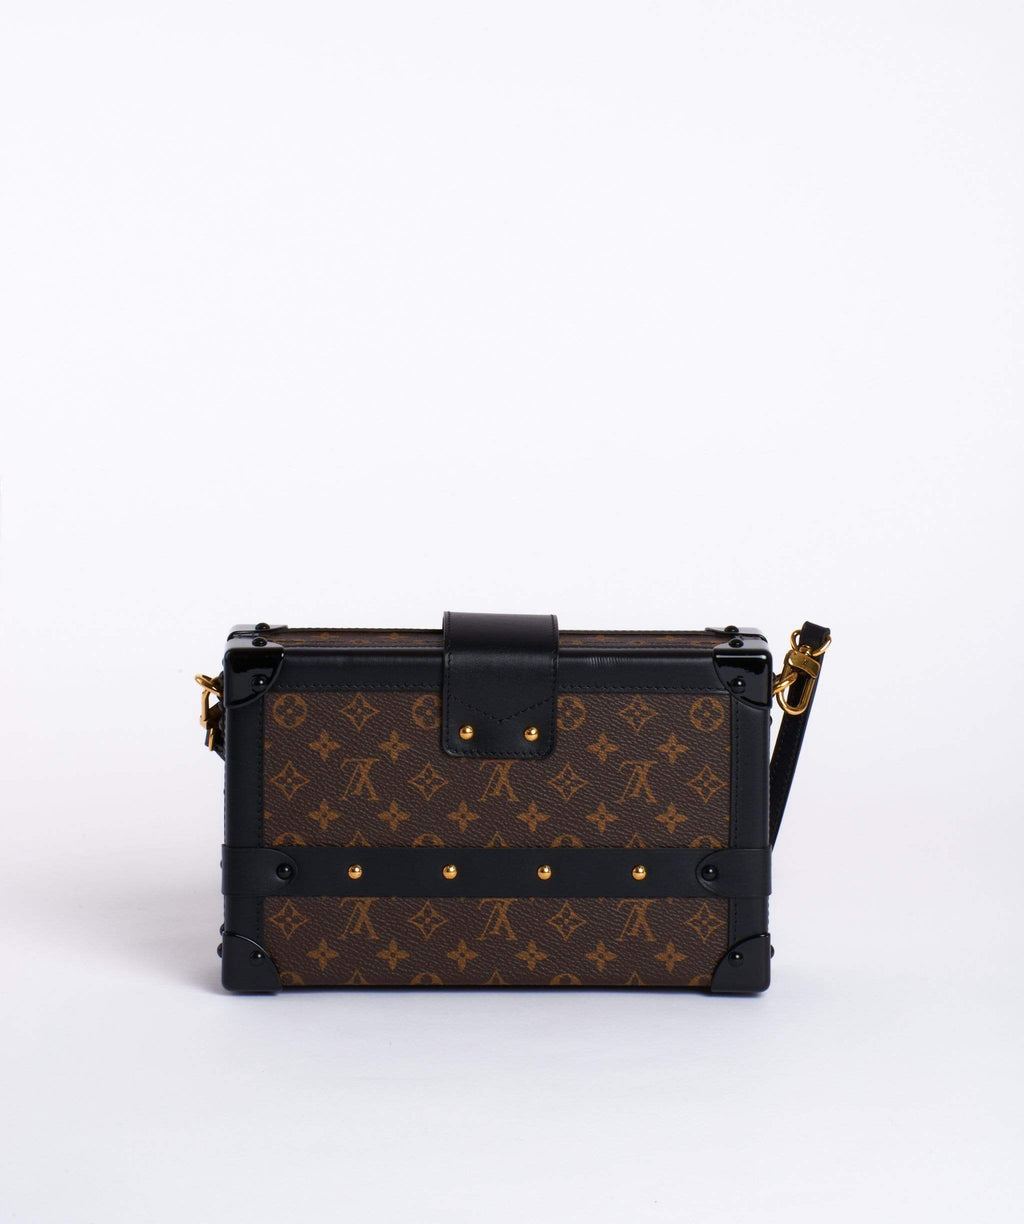 Shop Louis Vuitton PETITE MALLE Casual Style Street Style 2WAY Leather  Party Style (M21202) by LeO.